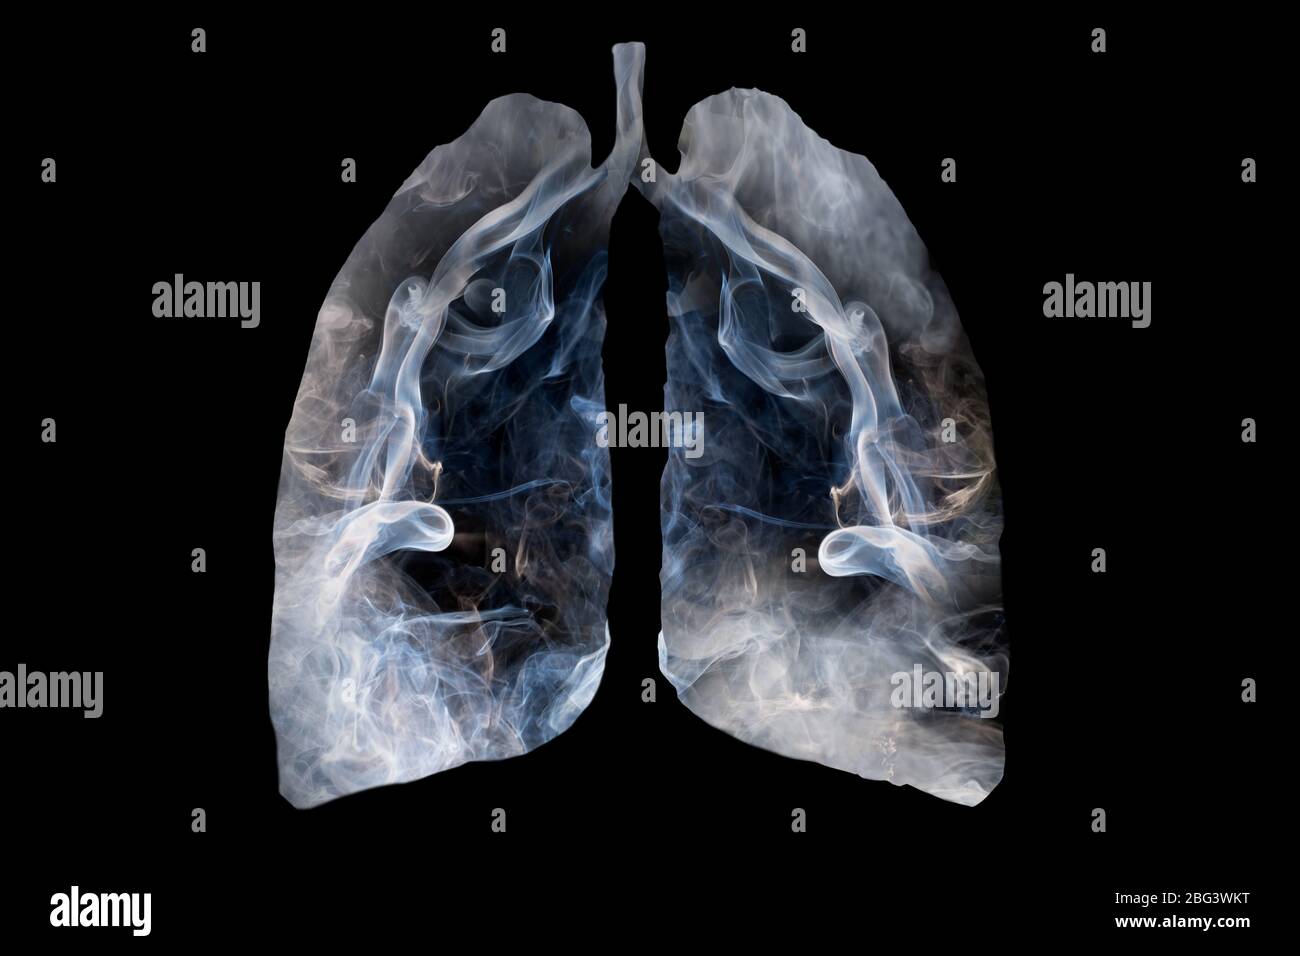 Illustration of a toxic smoke formation shaped as the human lung, The concept of cigarette smoker lungs on black background Stock Photo